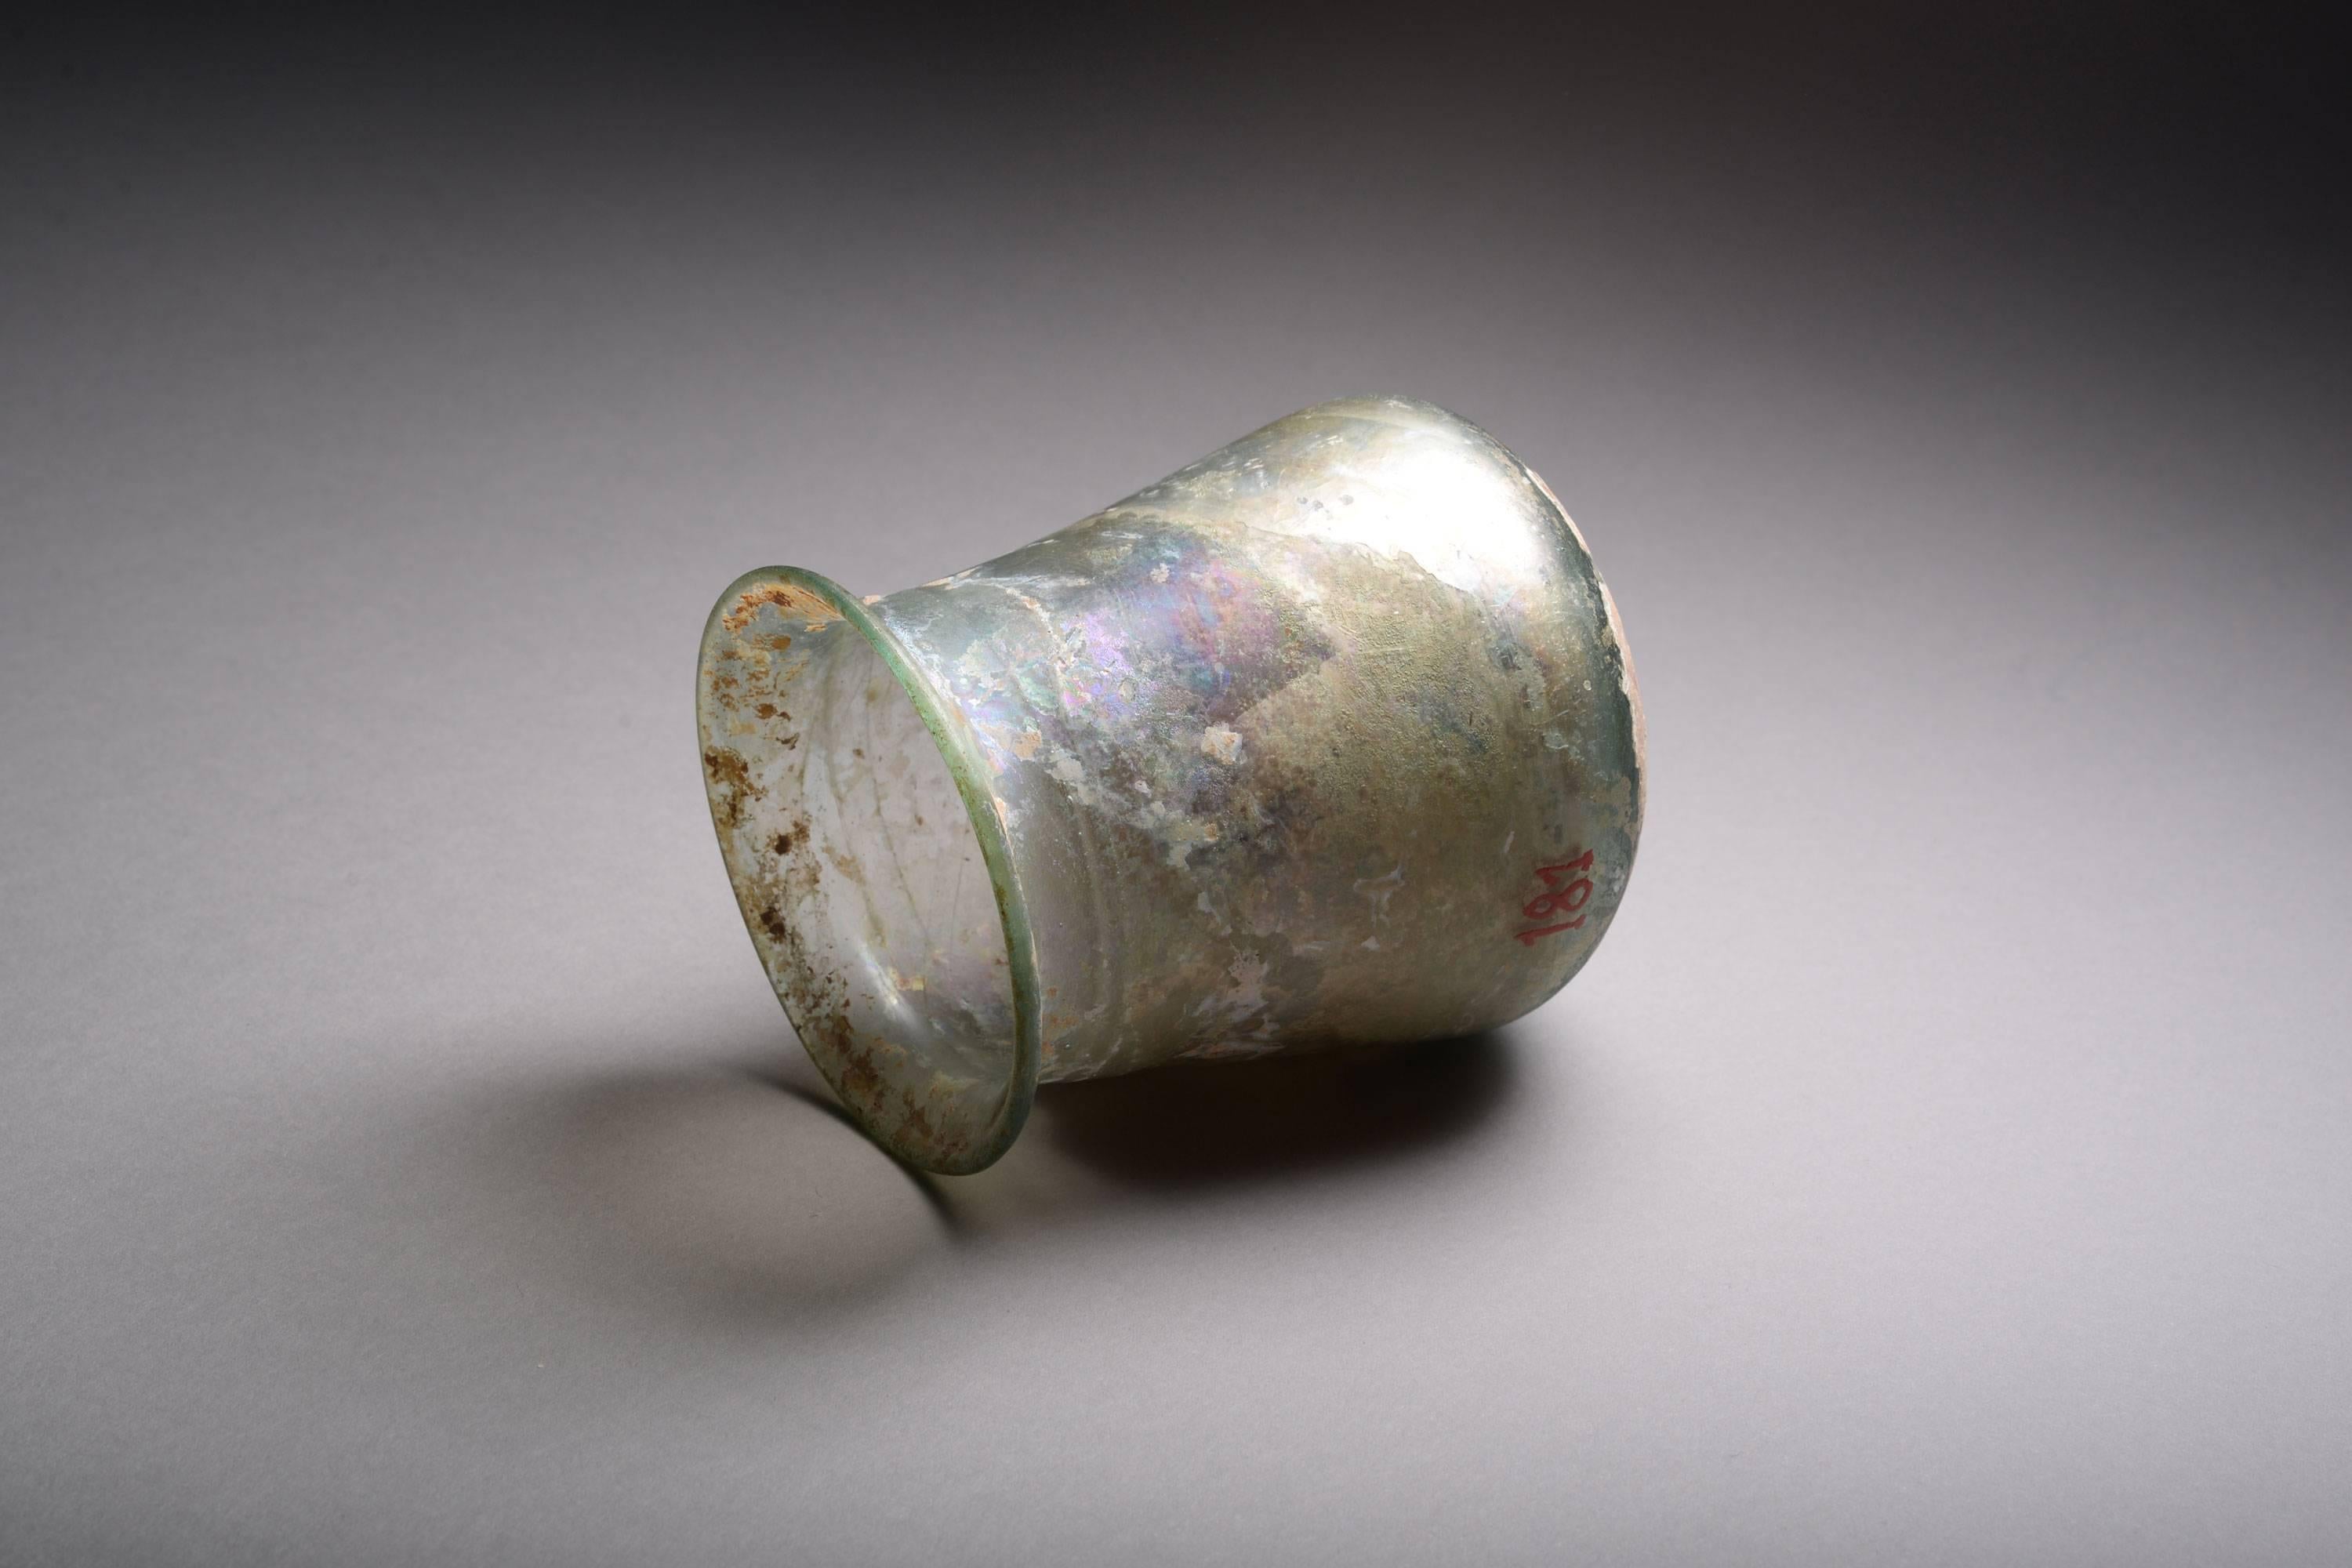 An ancient Roman glass beaker, dating to around 150 AD.

The green glass beaker with rainbow iridescence.  A beautiful glass shape, the beaker is a purely functional drinking vessel.  This example fits nicely into the hand, as it would have done